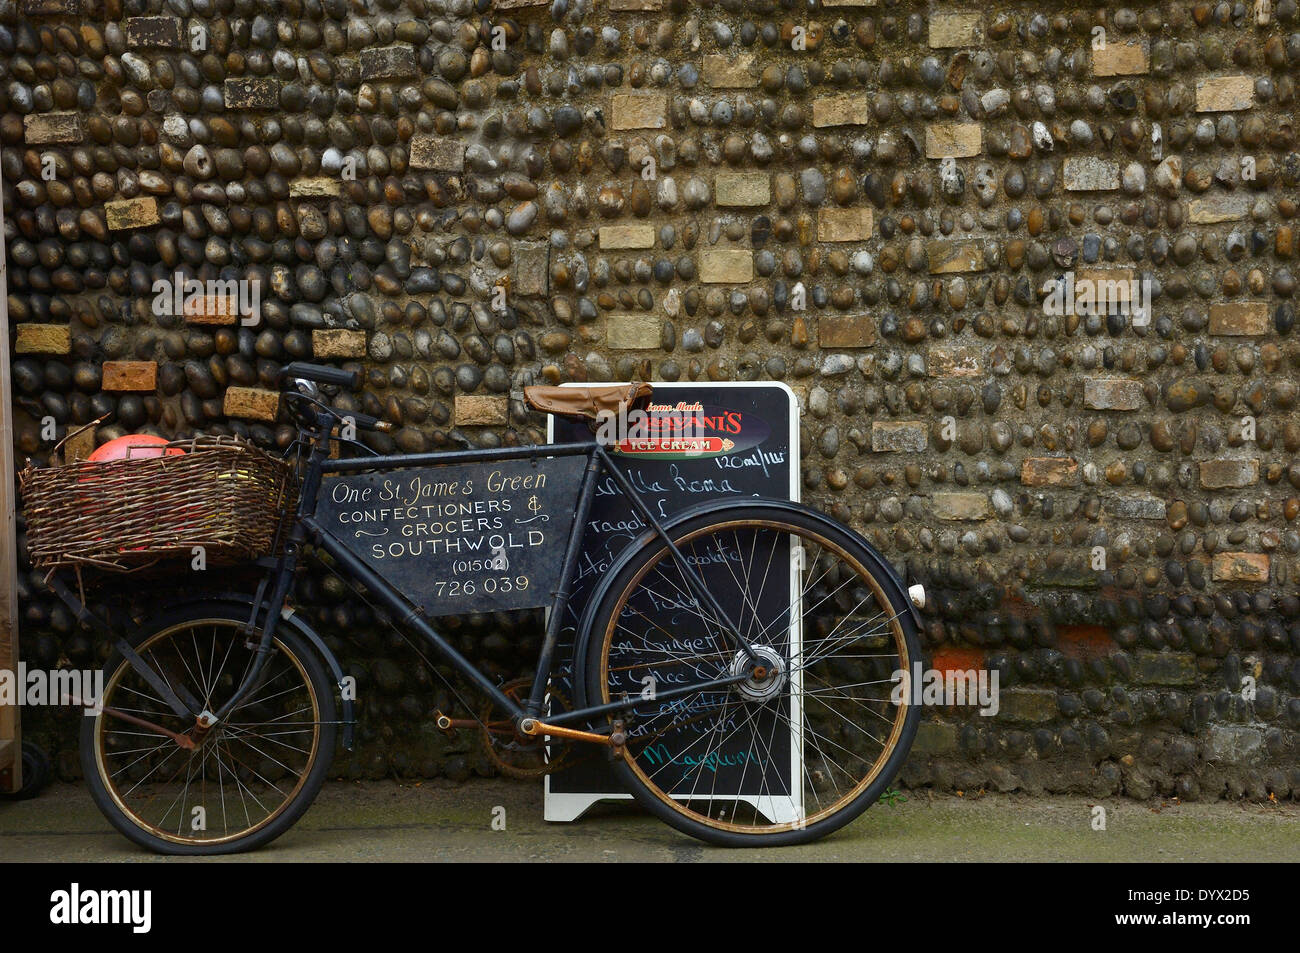 Old fashioned grocers delivery bicycle. Southwold, Suffolk, England. Stock Photo